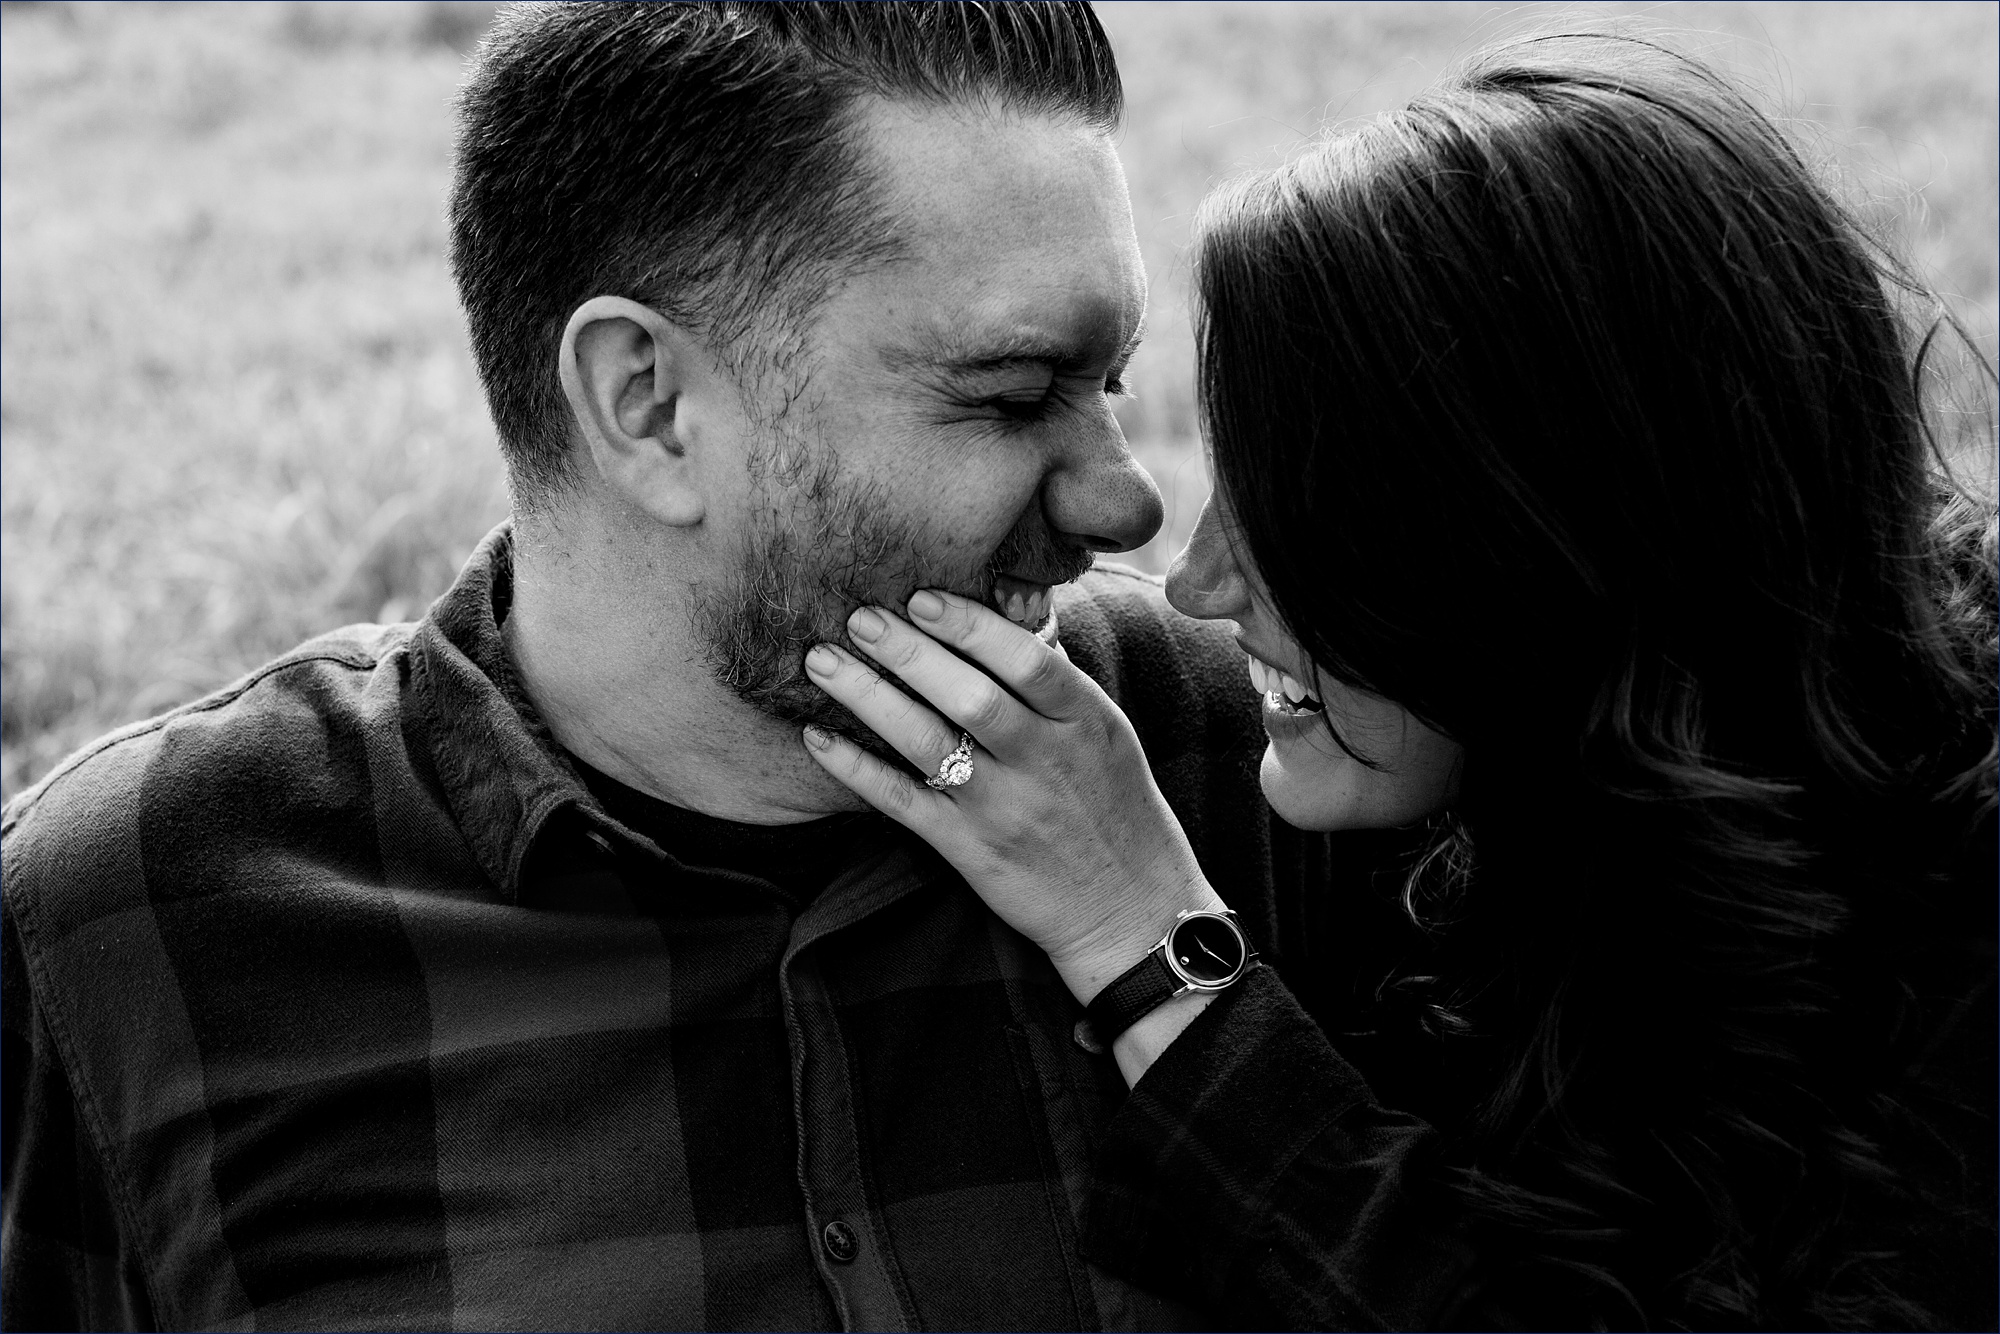 She squeezes his face tight and laughs with him for their engagement photos